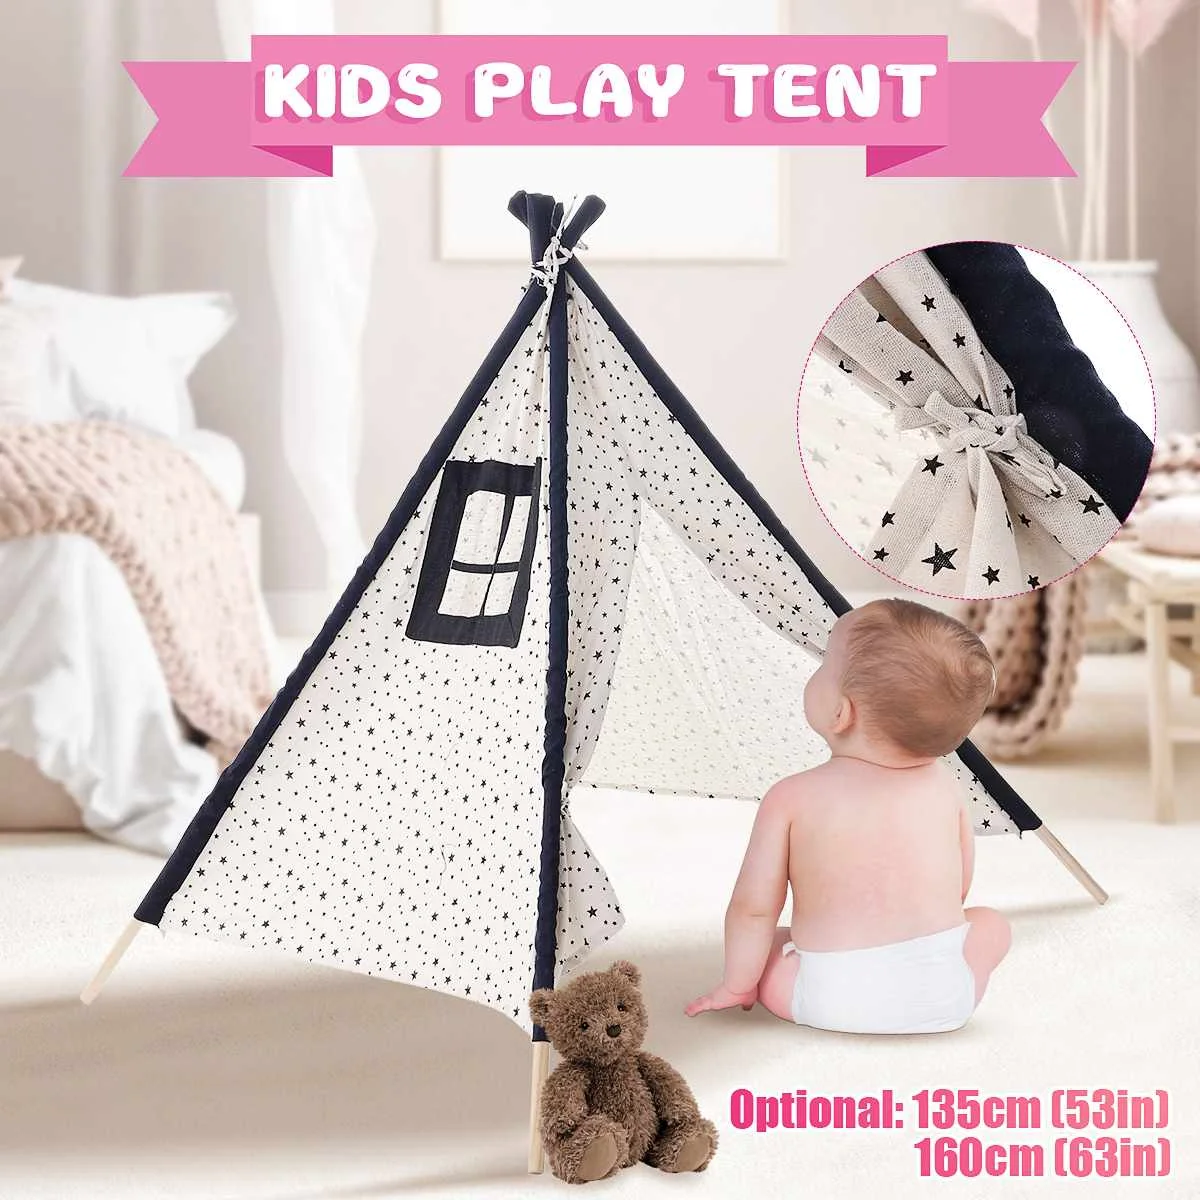 

Blue Star Tipi Triangle Kids Tent Canvas Sleeping Dome Play-Tent Teepee Game House Wigwam Room Children's Tent 135/160cm ES